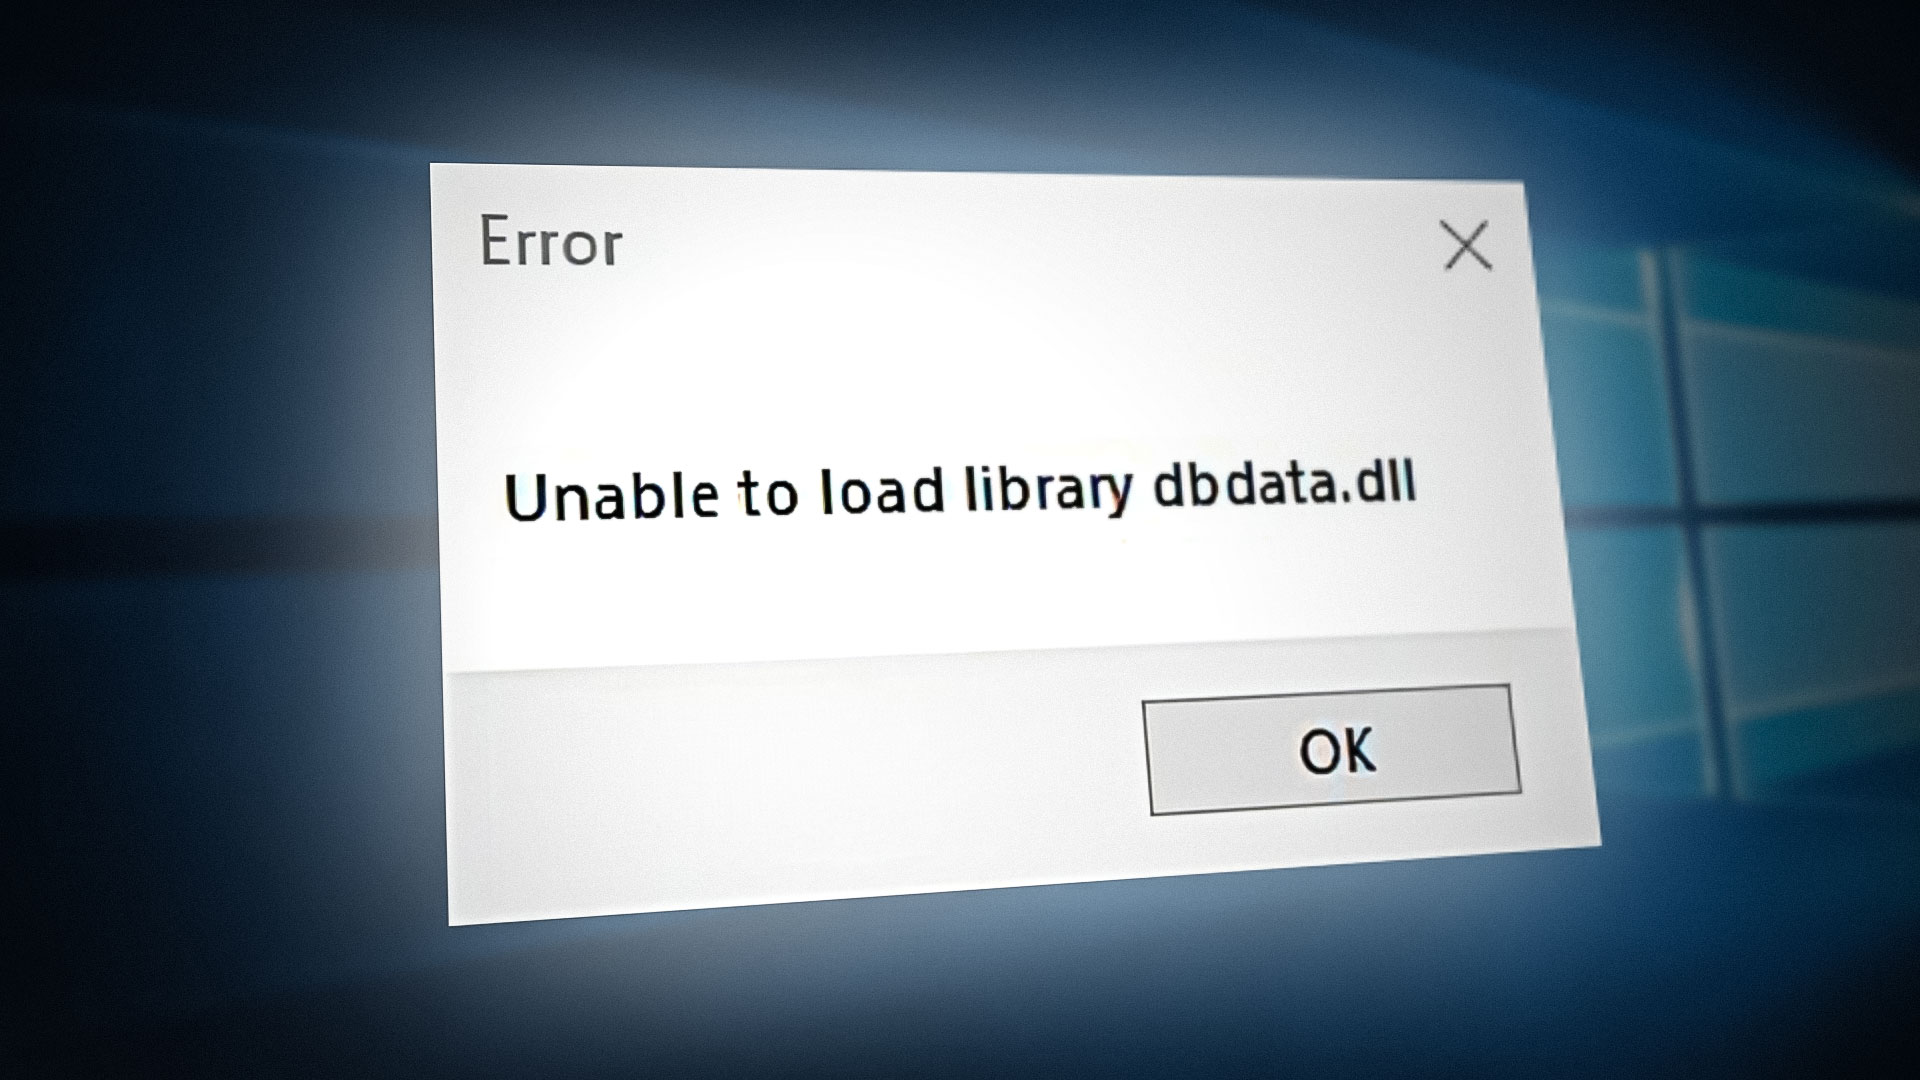 Error "Unable to load library dbdata.dll" on Windows